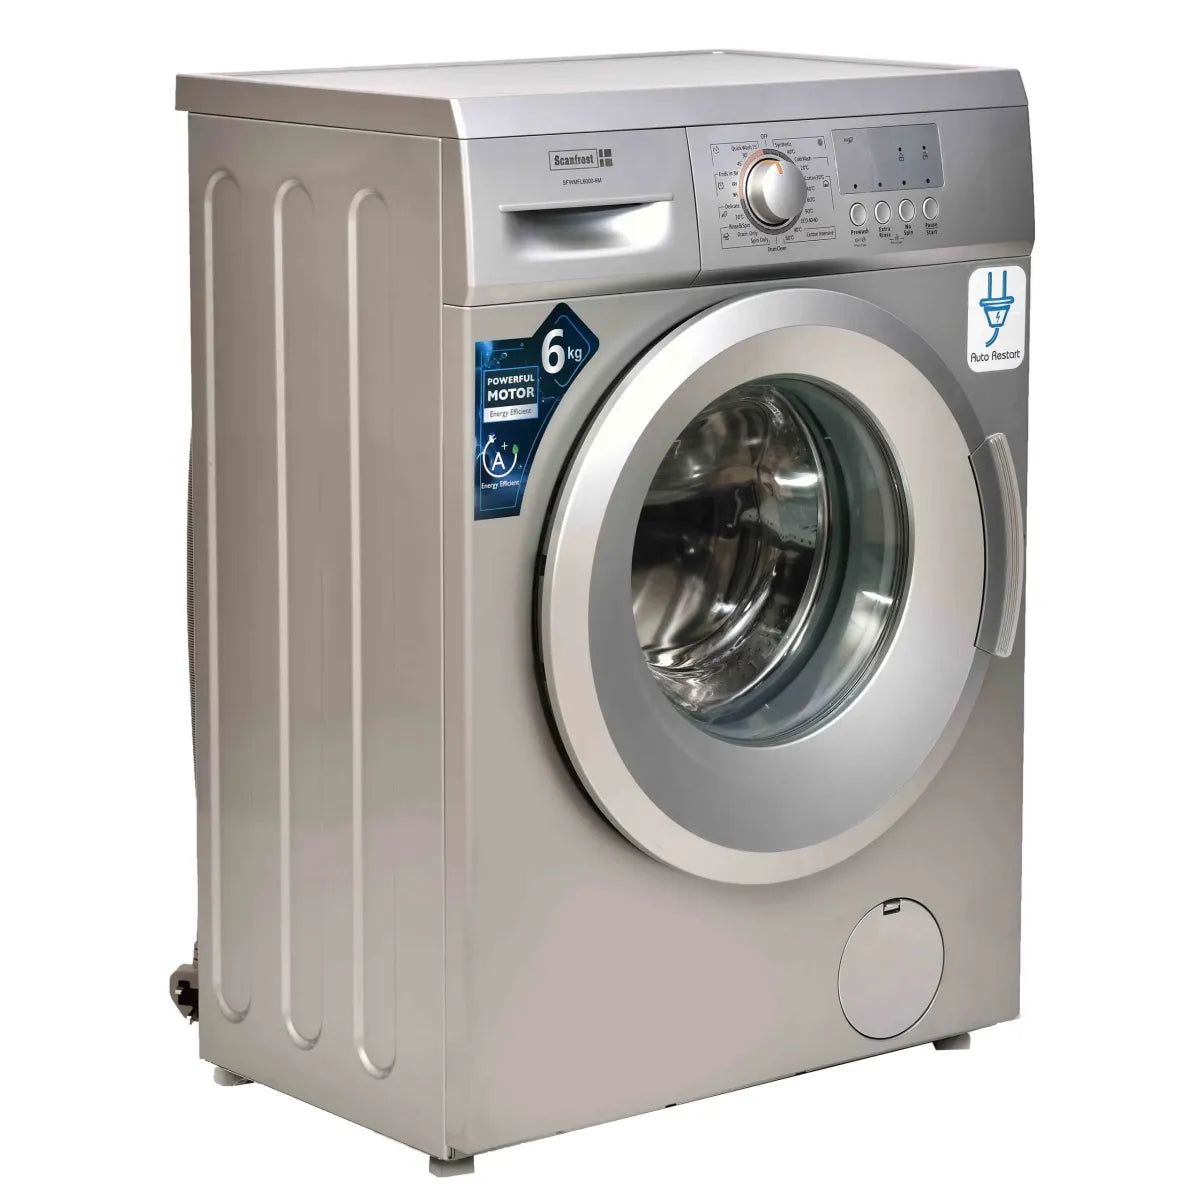 Scanfrost SFWMFL7001 7kg Fully Automatic Front Load Washing Machine